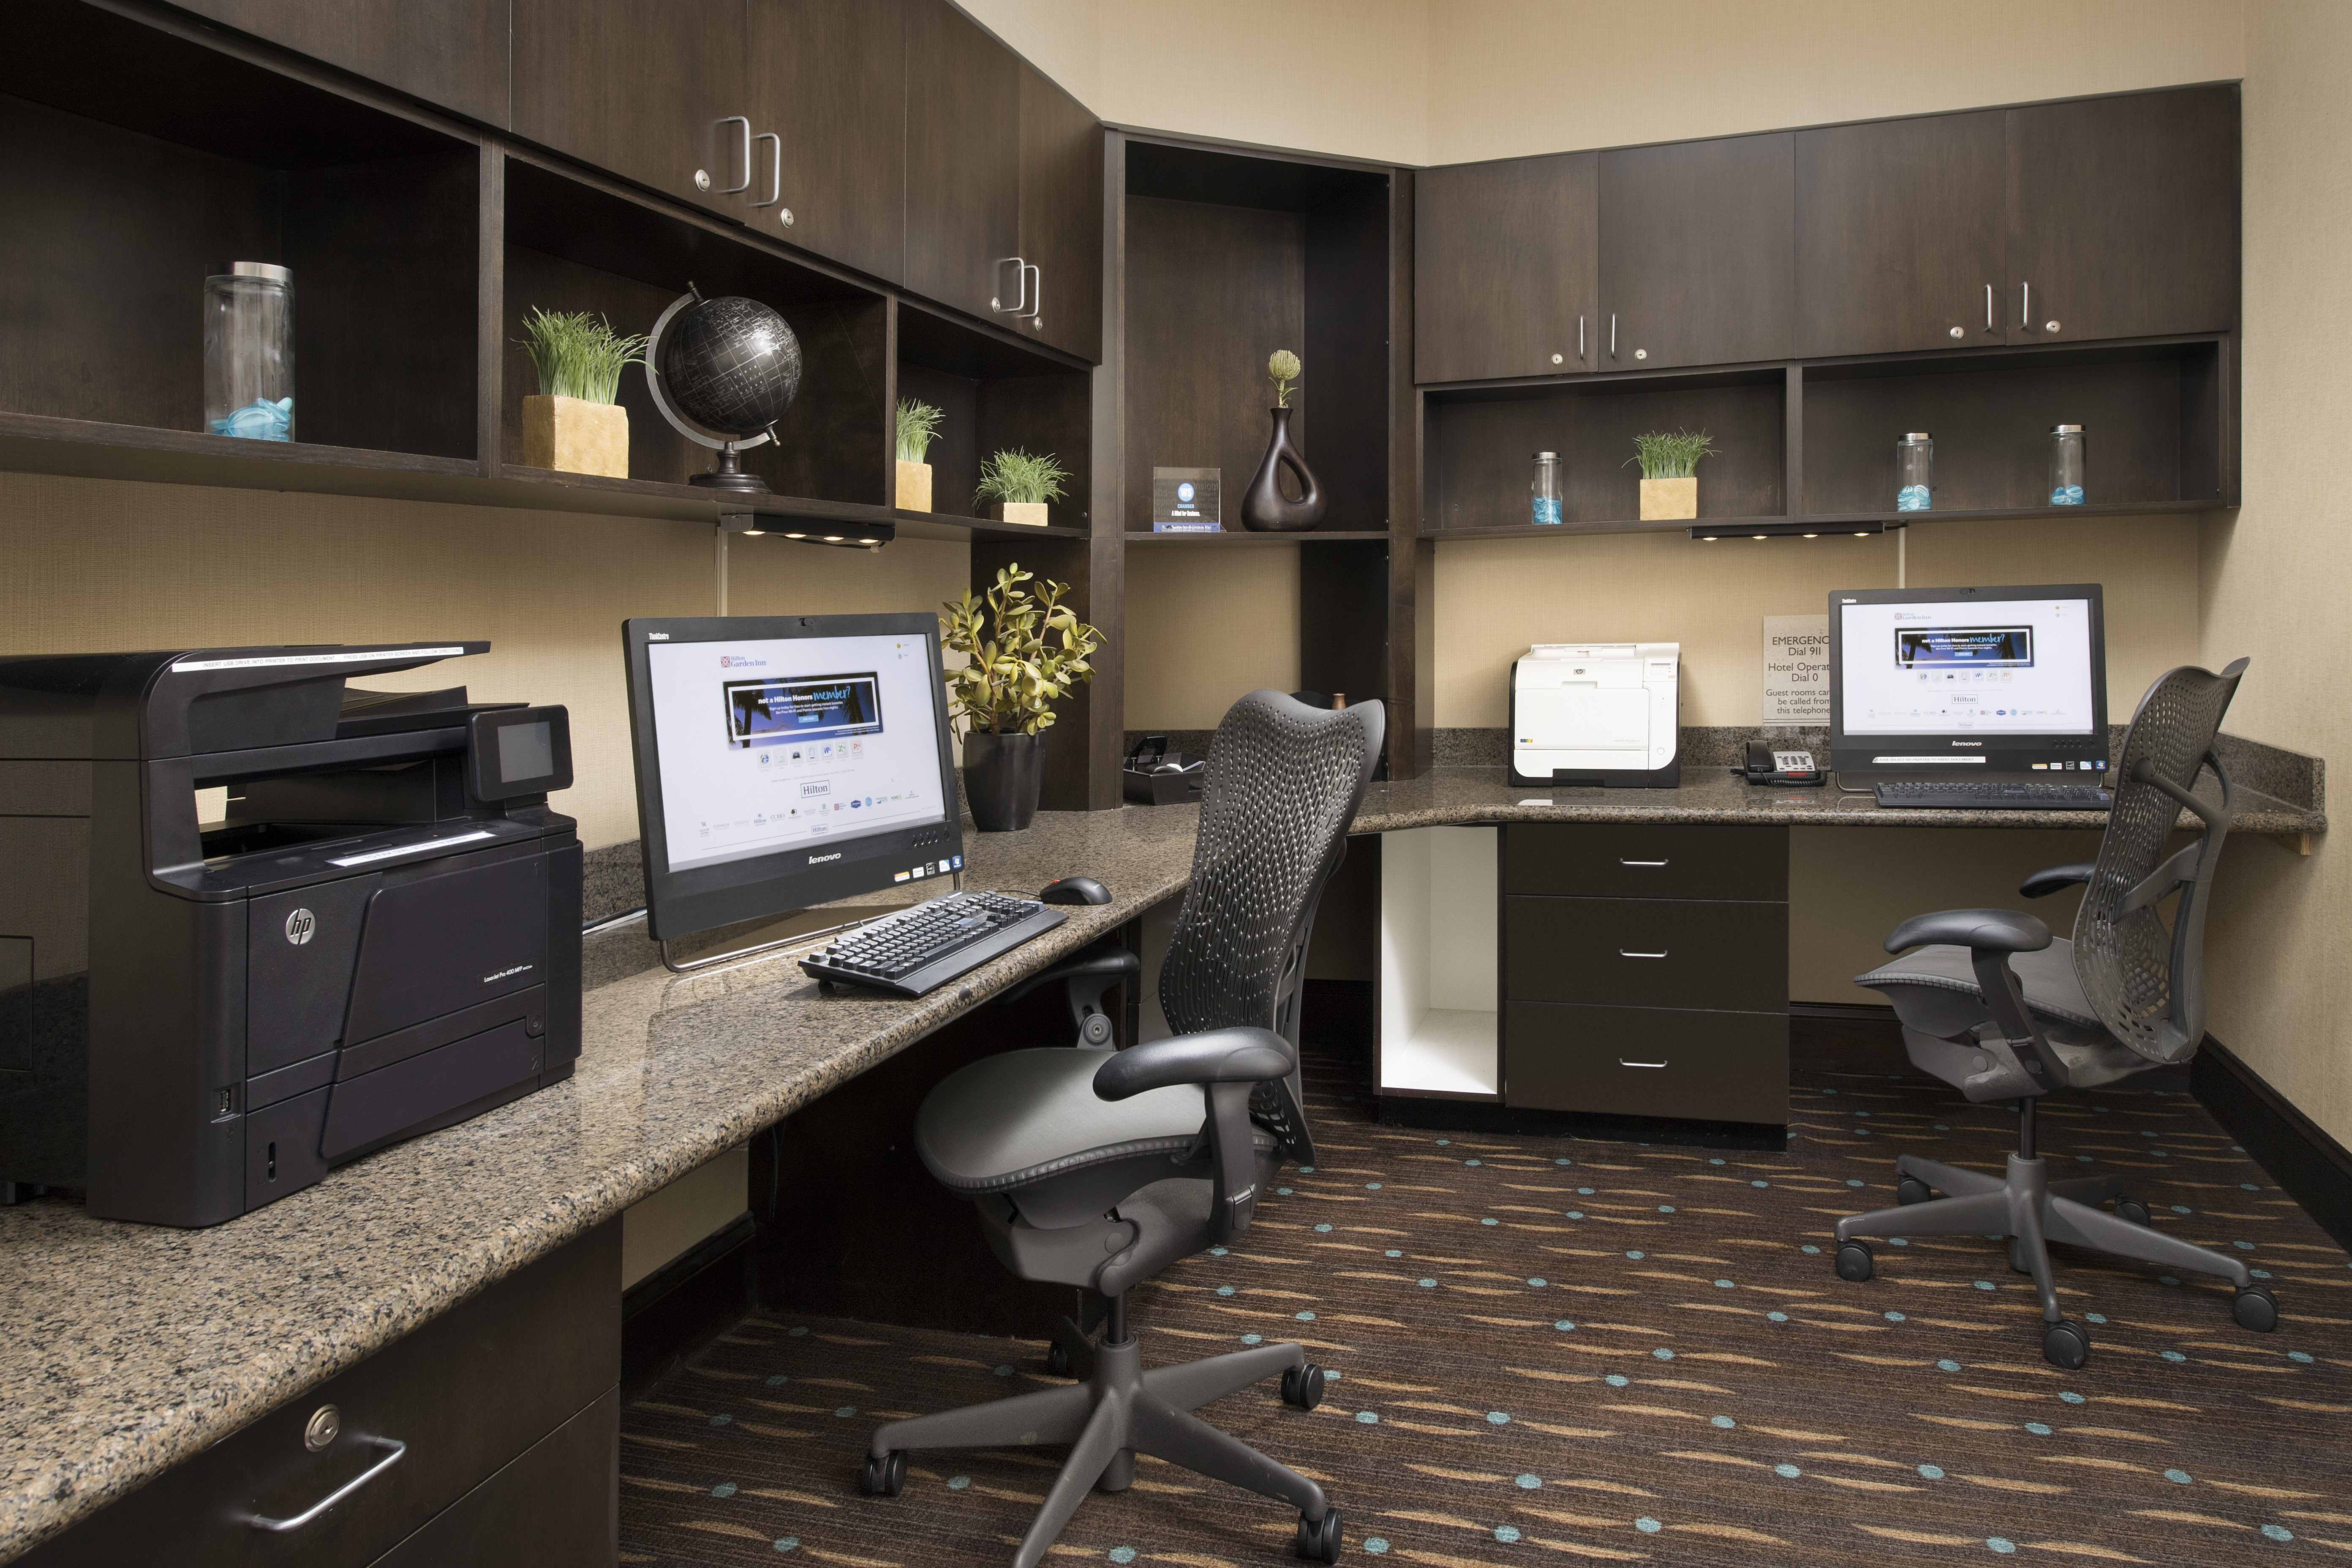 Business Center With Overhead Cabinets, Two Computer Workstations With Ergonomic Chairs, and Printer/Fax/Copier